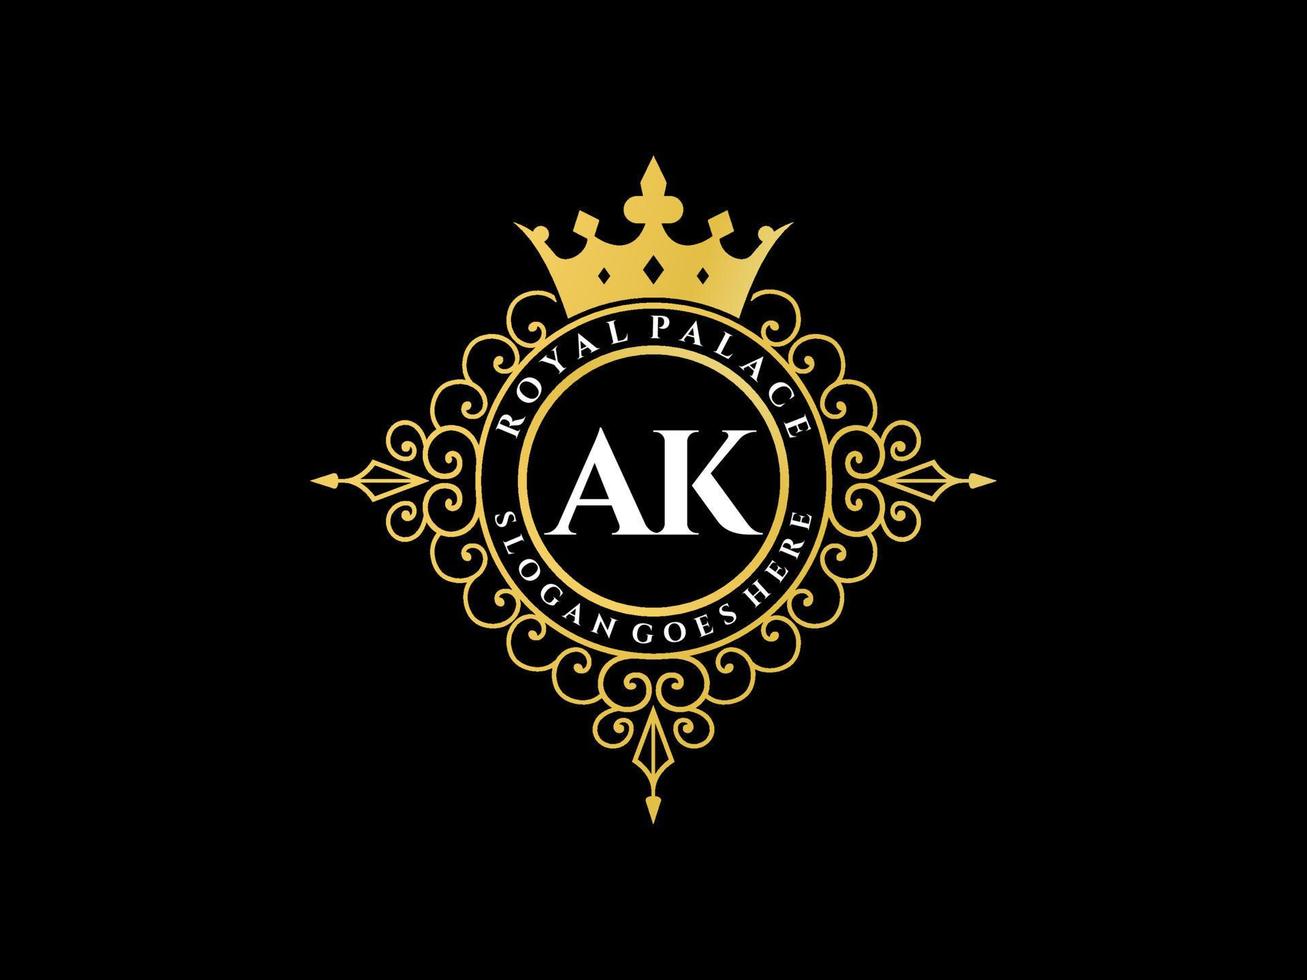 Letter AK Antique royal luxury victorian logo with ornamental frame. vector